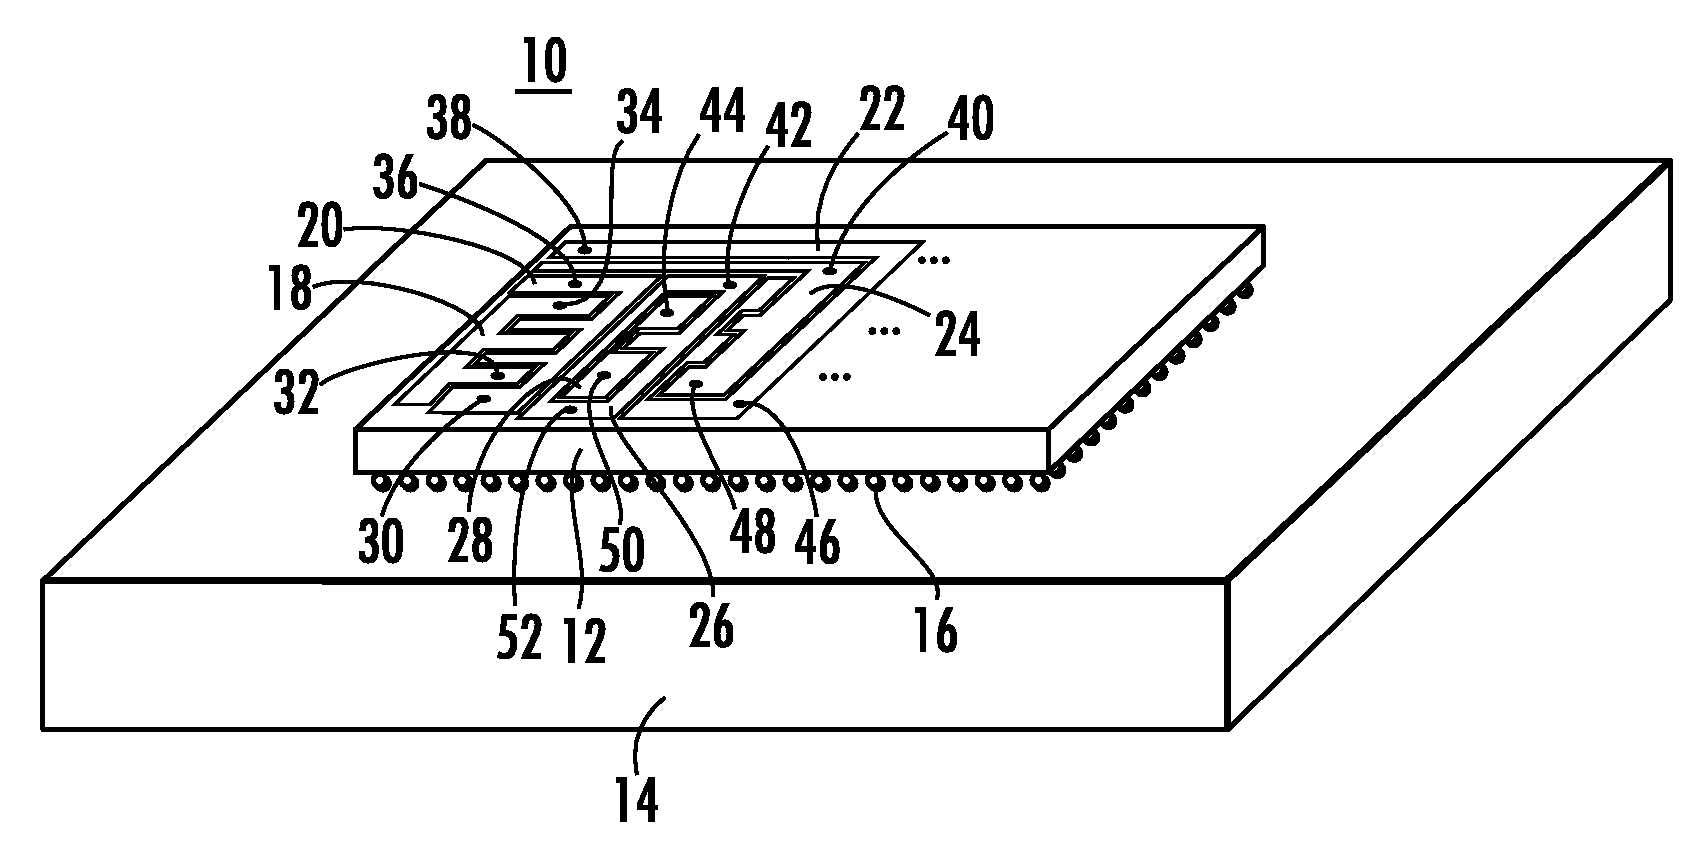 Capacitance Structures for Defeating Microchip Tampering